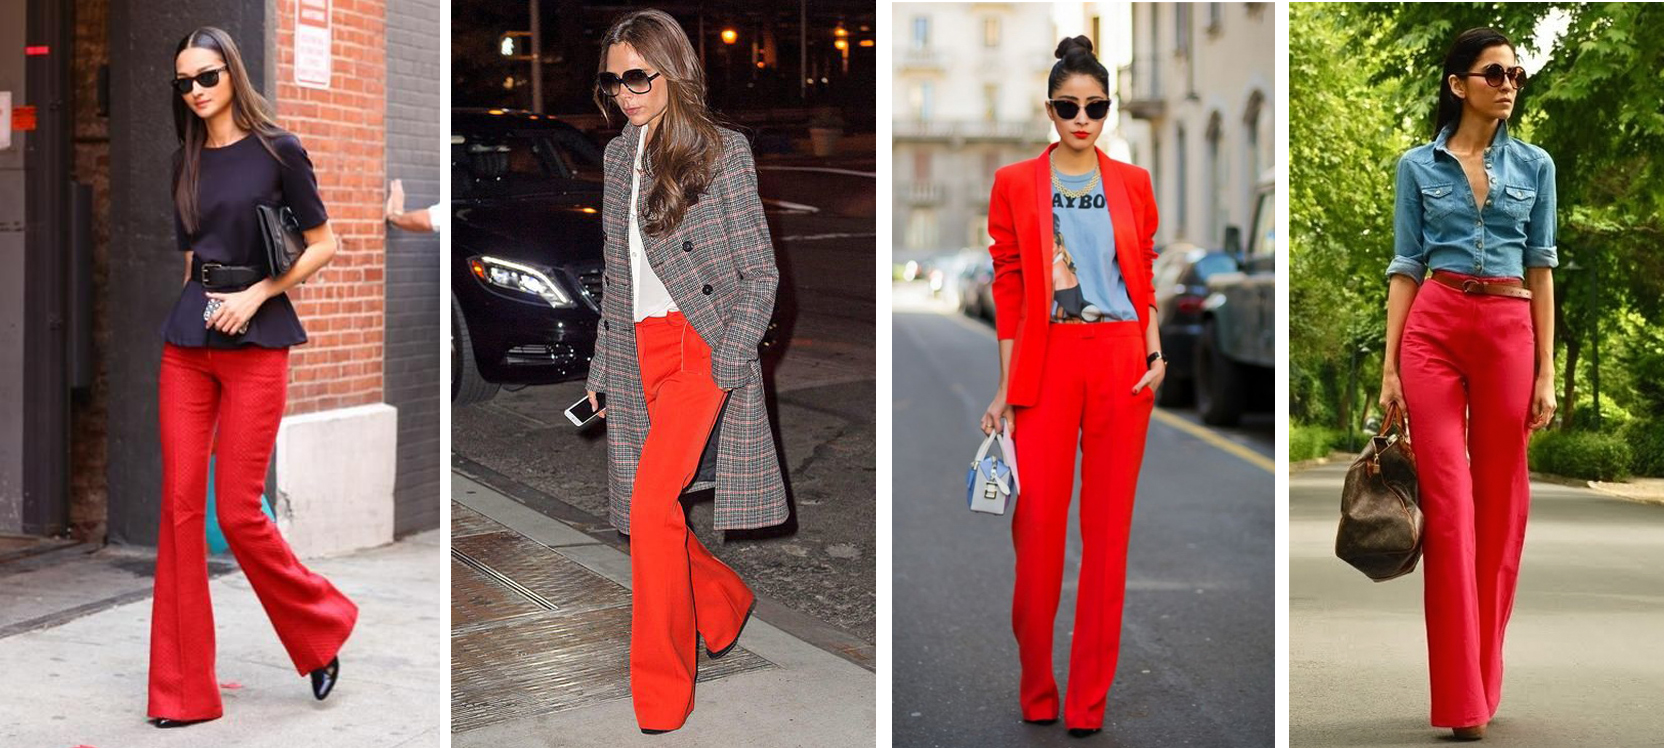 Red Pant Special at Fashion Week - Sydne Style